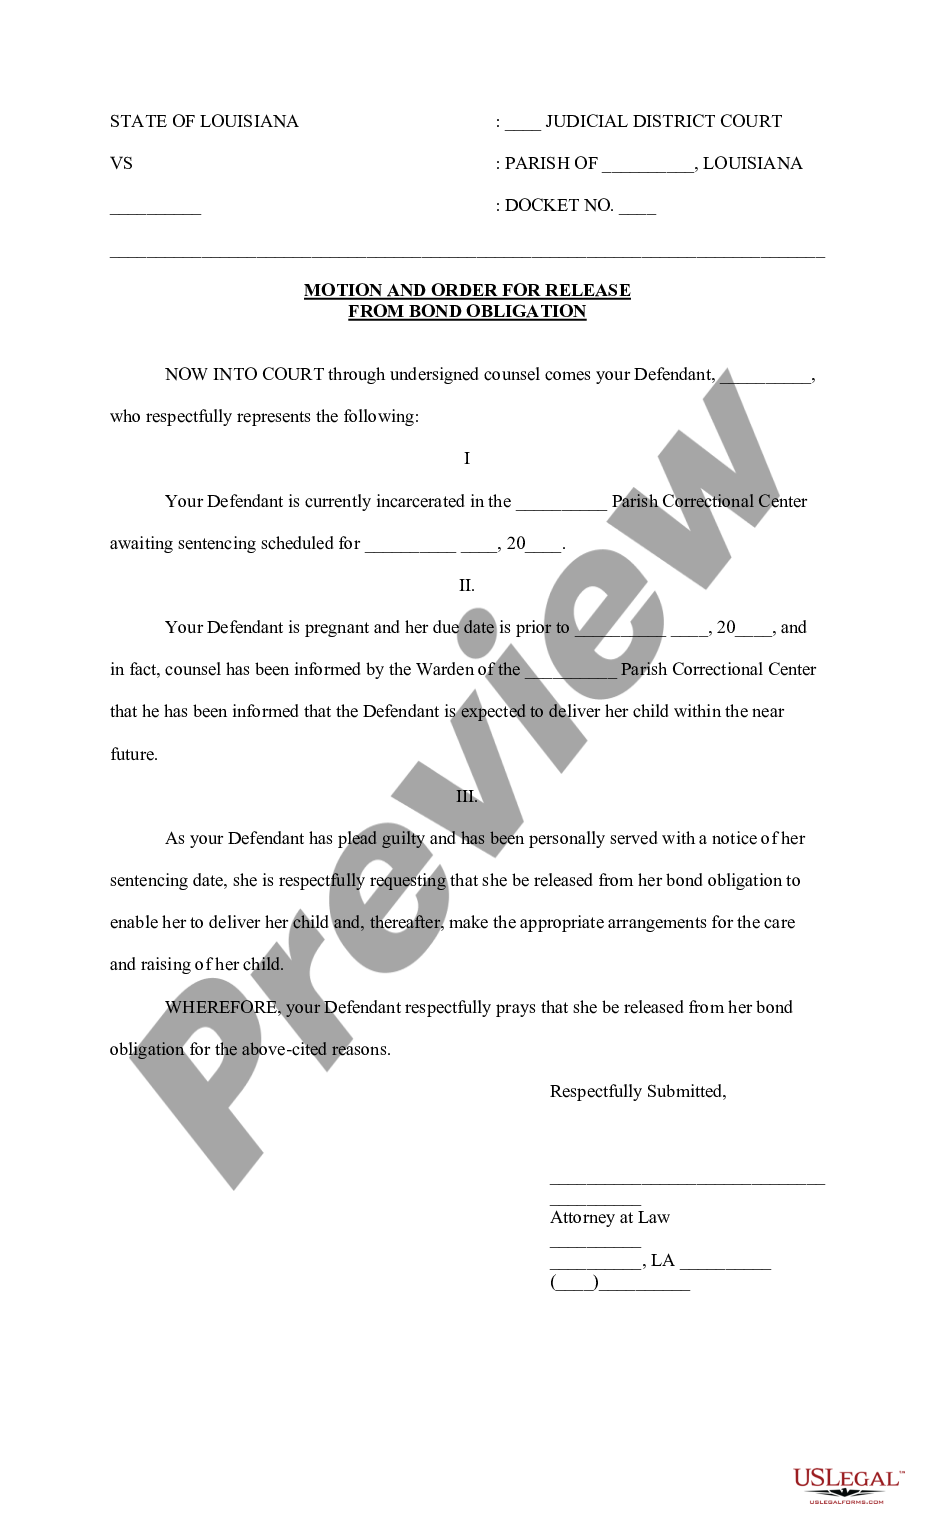 page 0 Motion and Order to Release from Bond Obligation preview